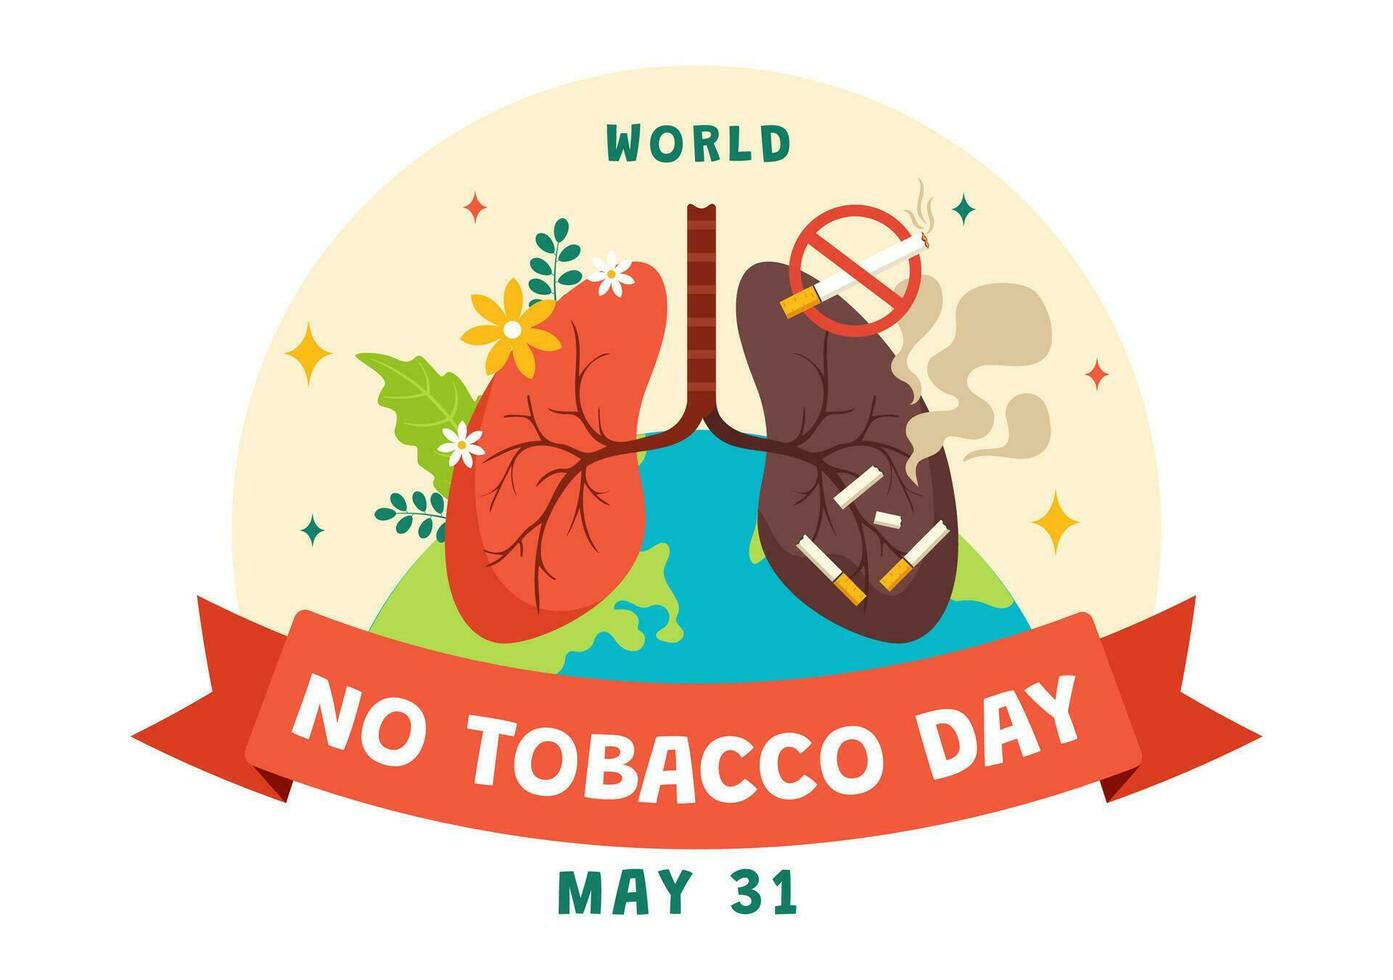 World No Tobacco Day Vector Illustration on 31 May with Stop Smoking and Cigarette Butt because Harm the Lungs in Healthcare Flat Background